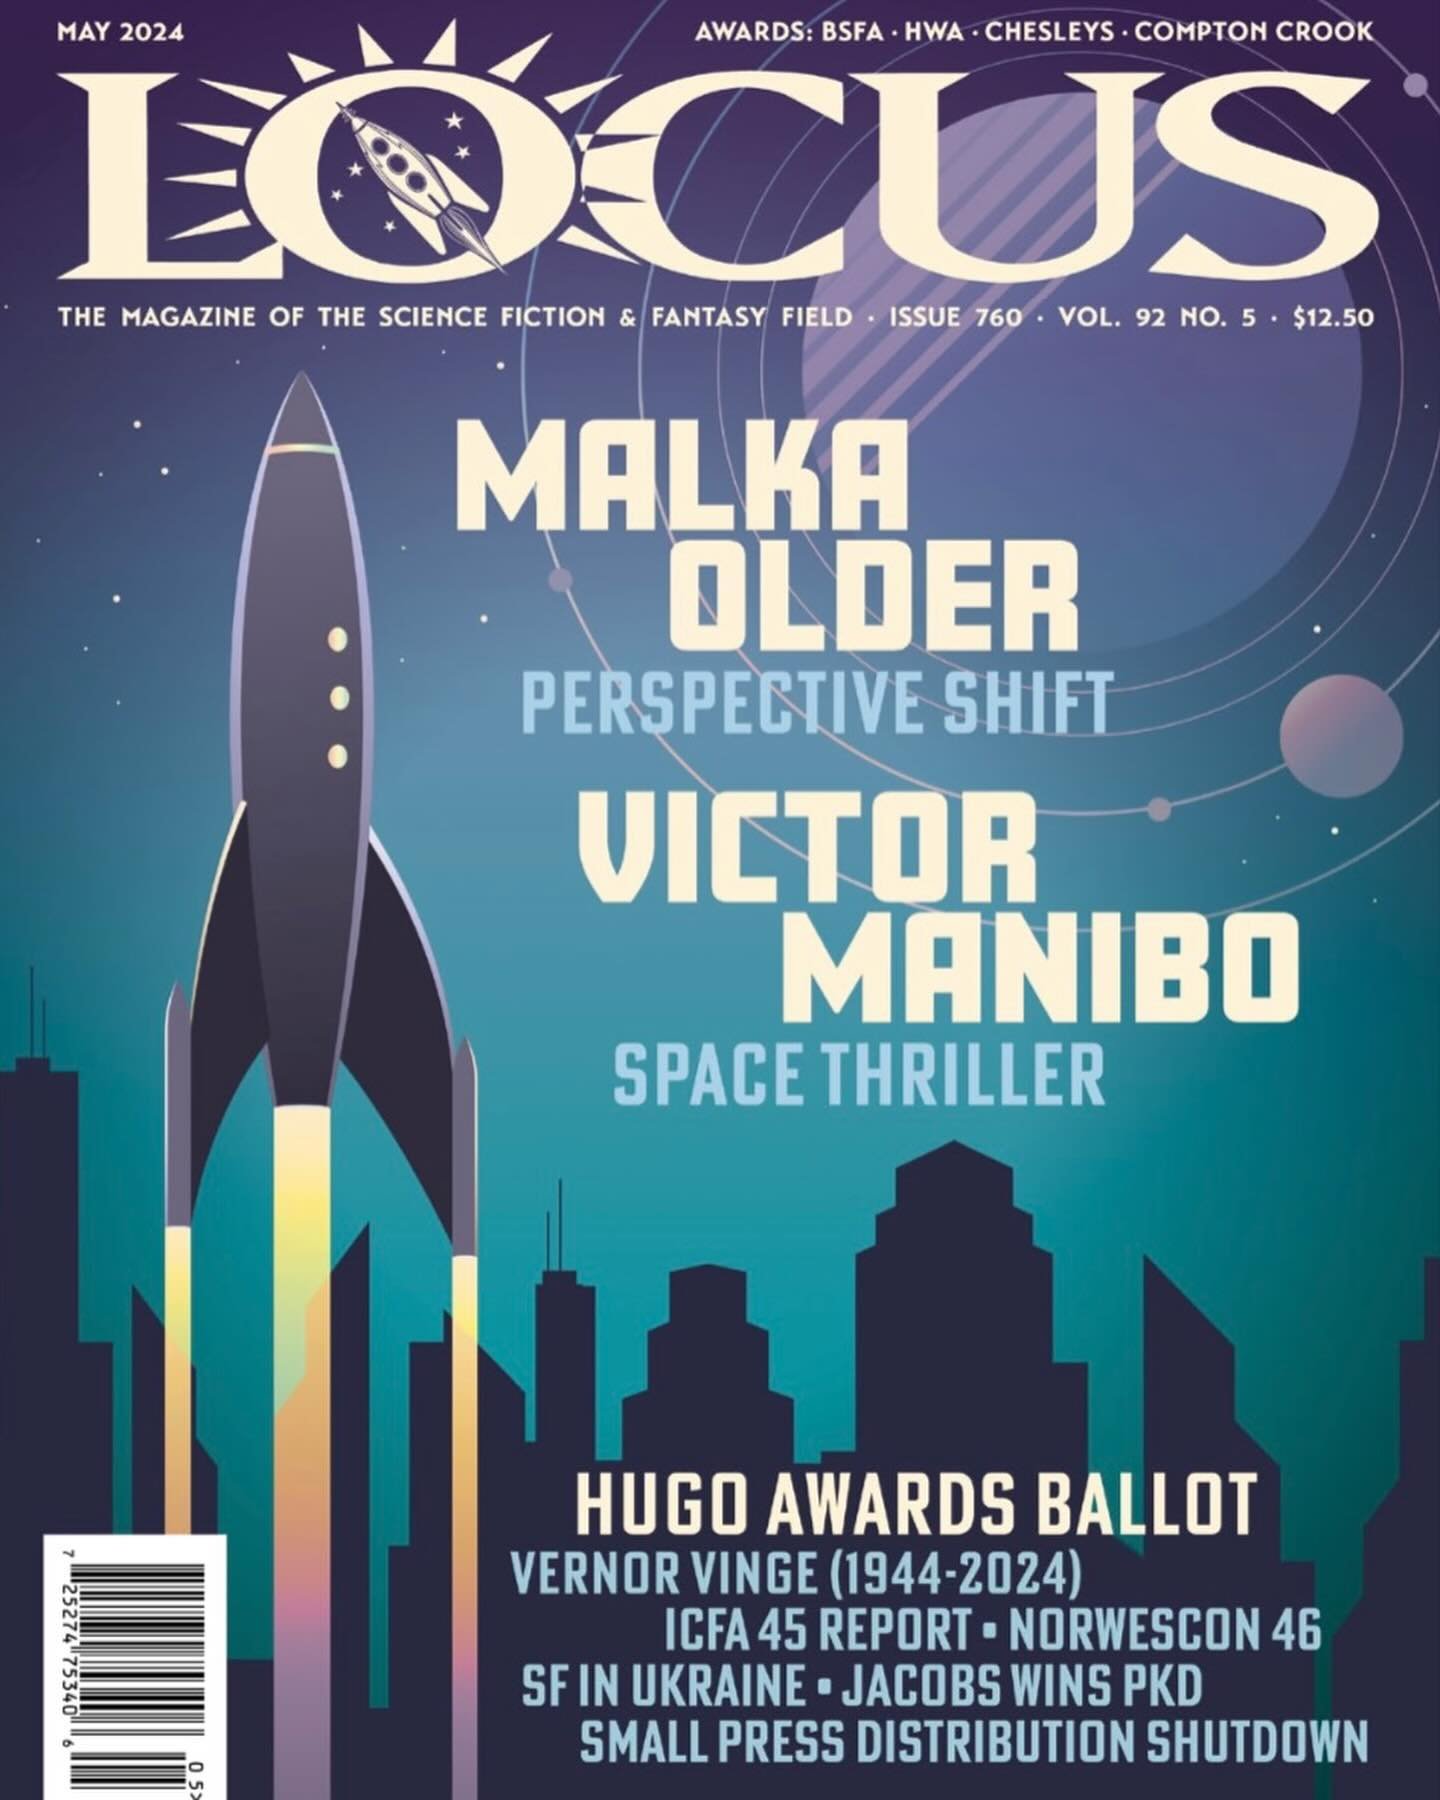 What a surreal thrill to see my name on that cover&mdash;and next to a brilliant author I so admire! Thank you, @locusmagazine and Arley Sorg for such a fun interview. You can get the May issue below, but more than that, I&rsquo;d encourage you to su